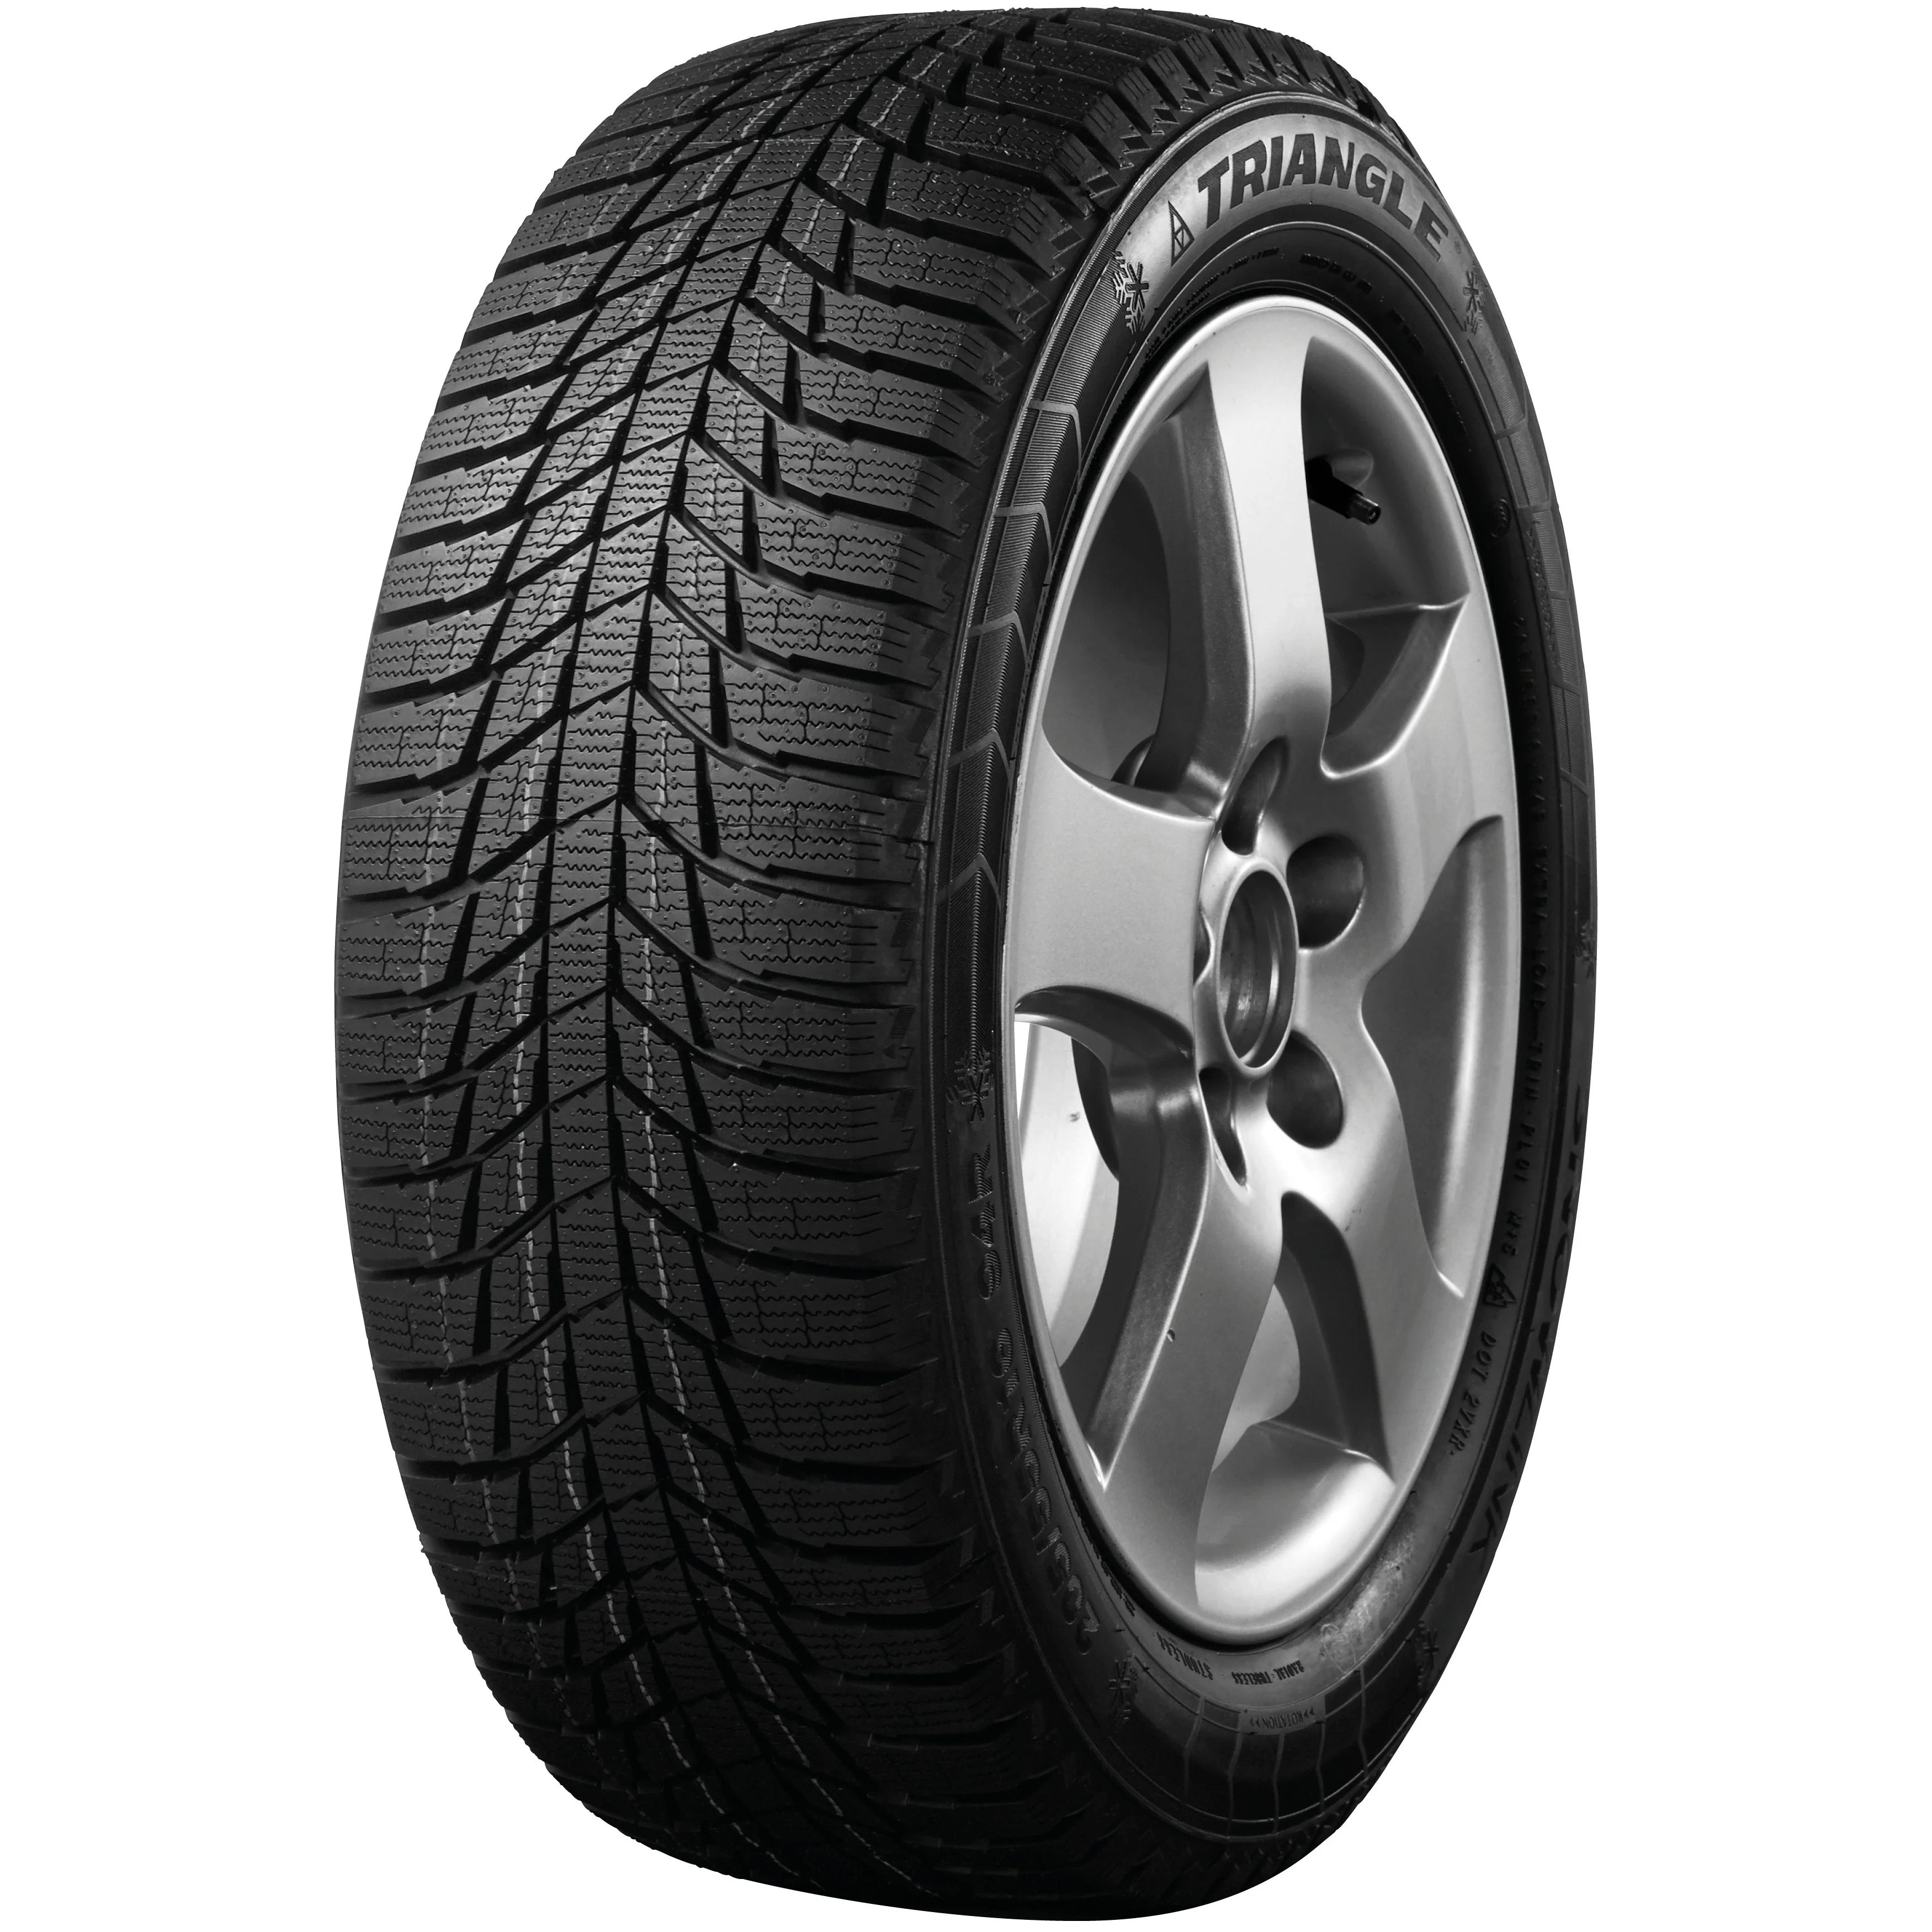 

CHINA TOP CLASS TRIANGLE BRAND PL01 255/50R19 WINTER-SNOW RADIAL TYRE